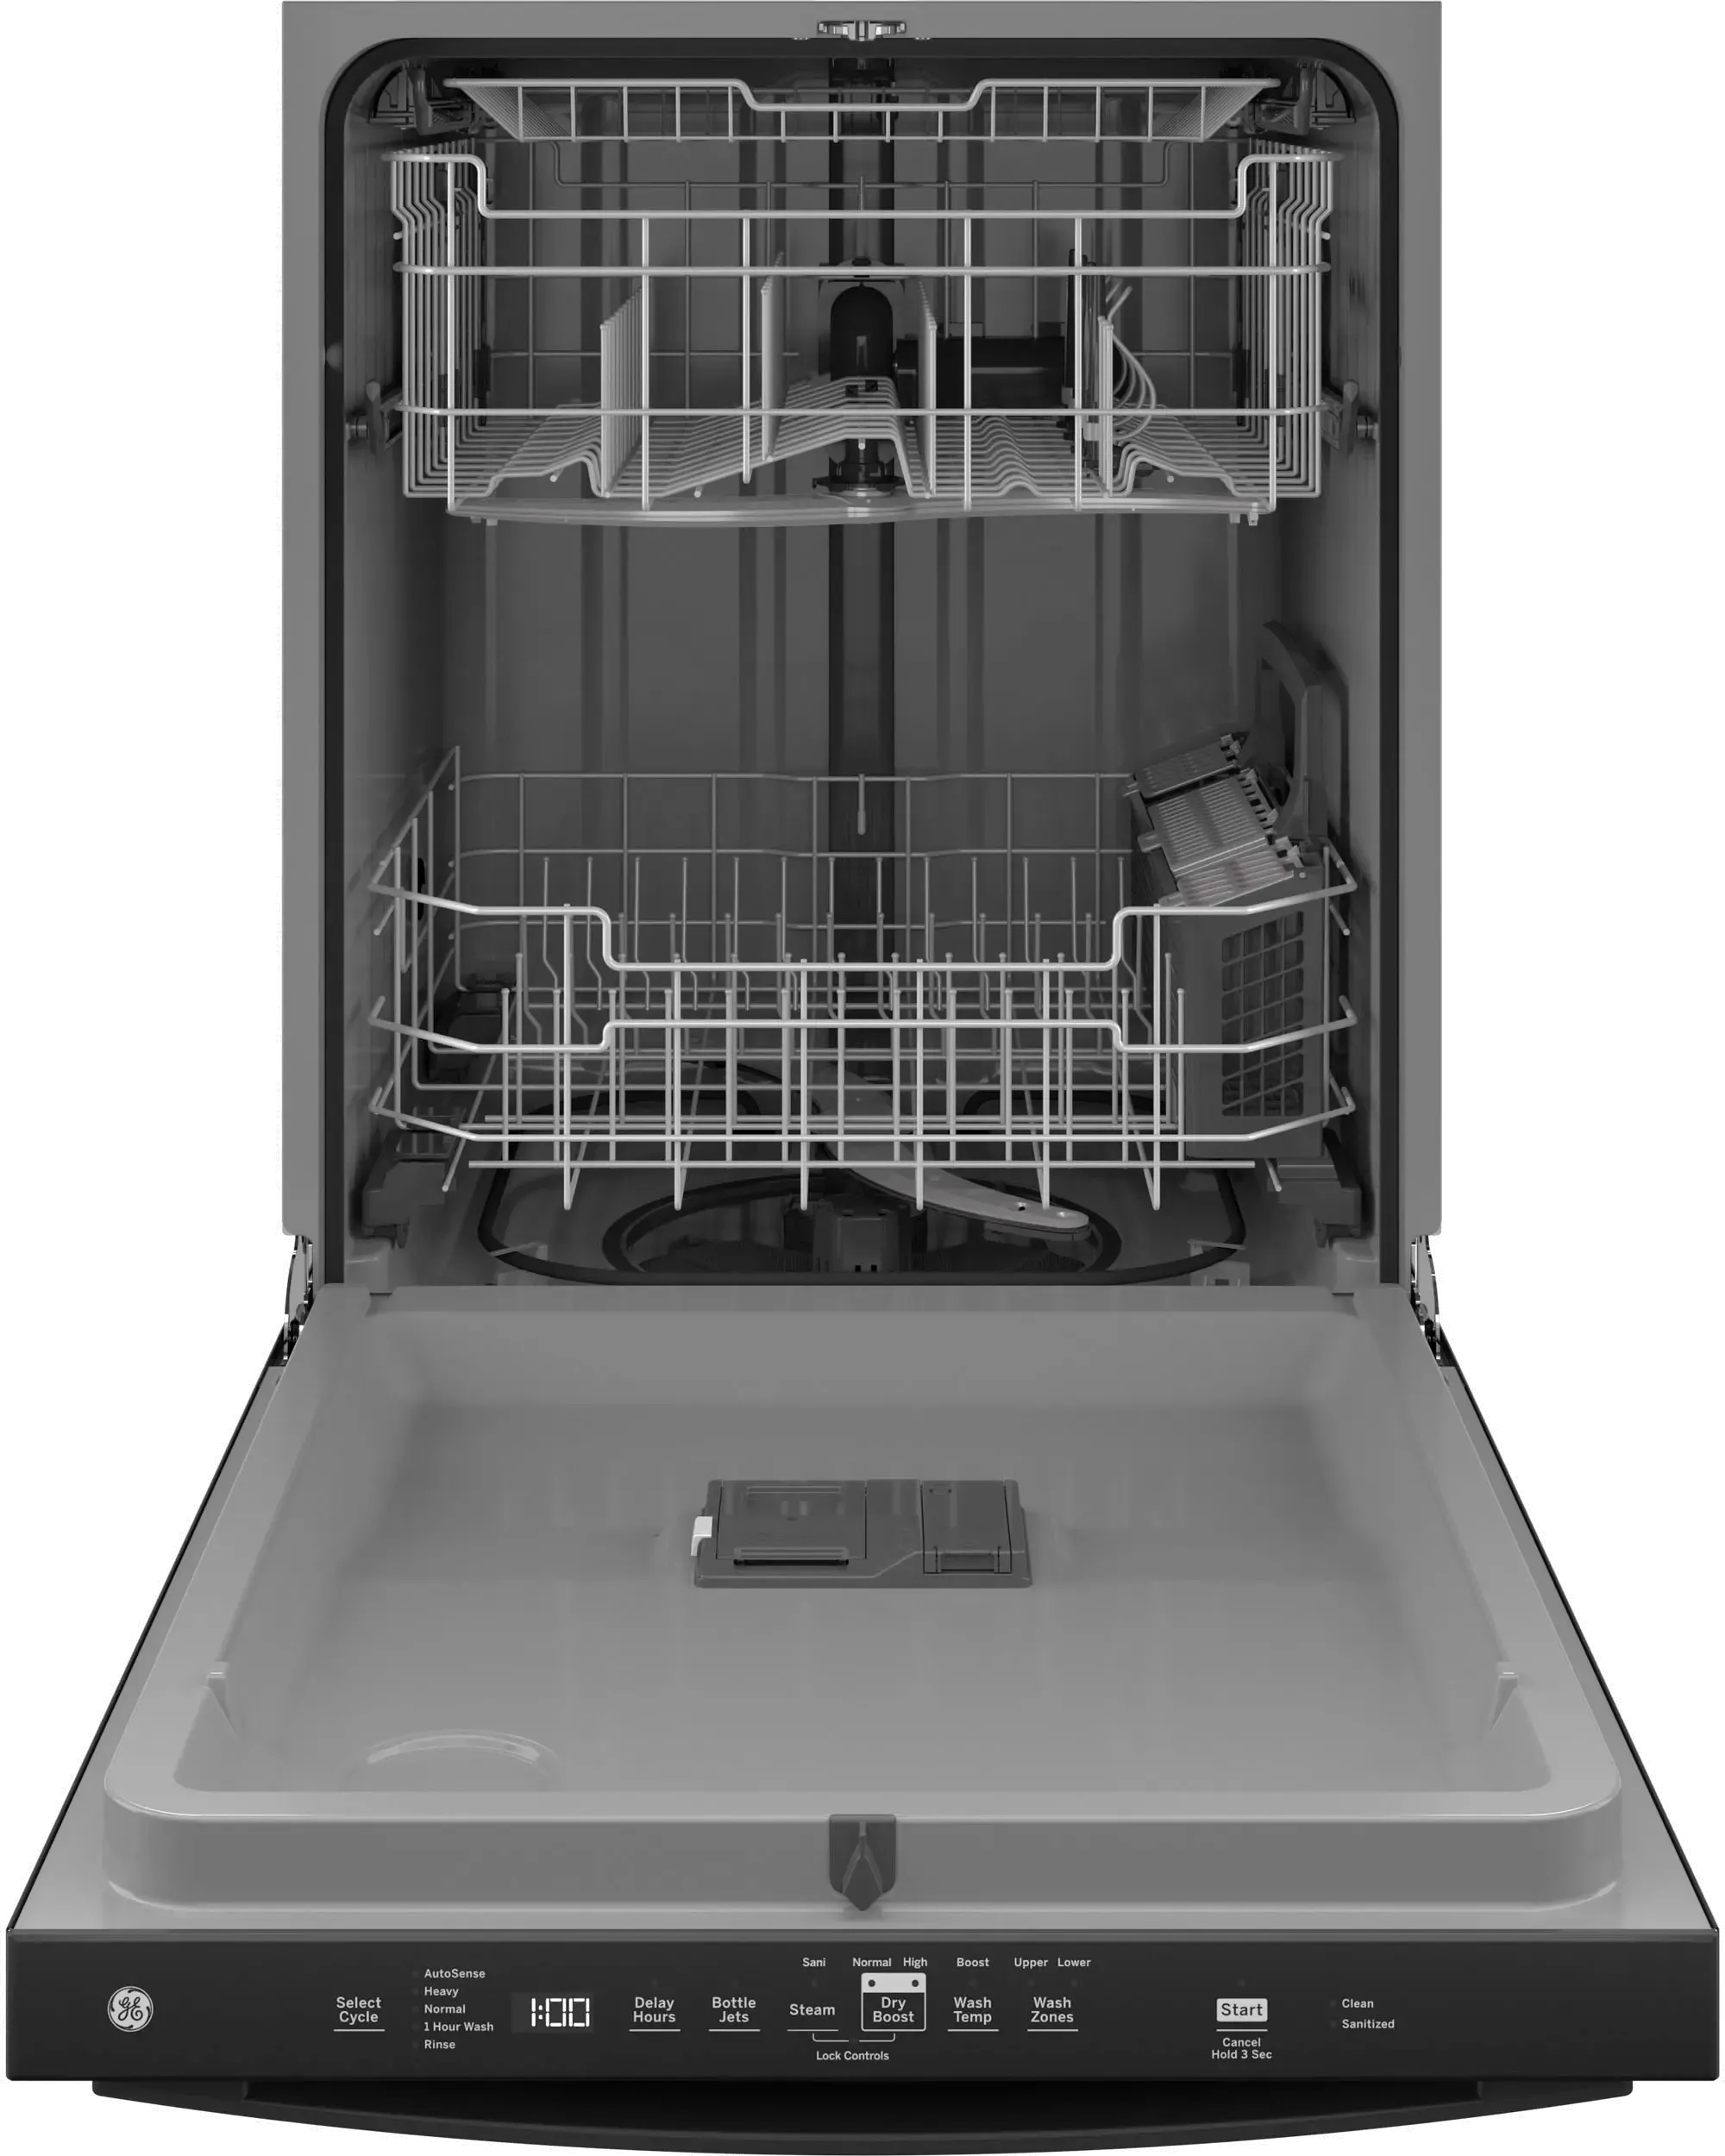 GE Top Control Dishwasher GDT630PGRBB